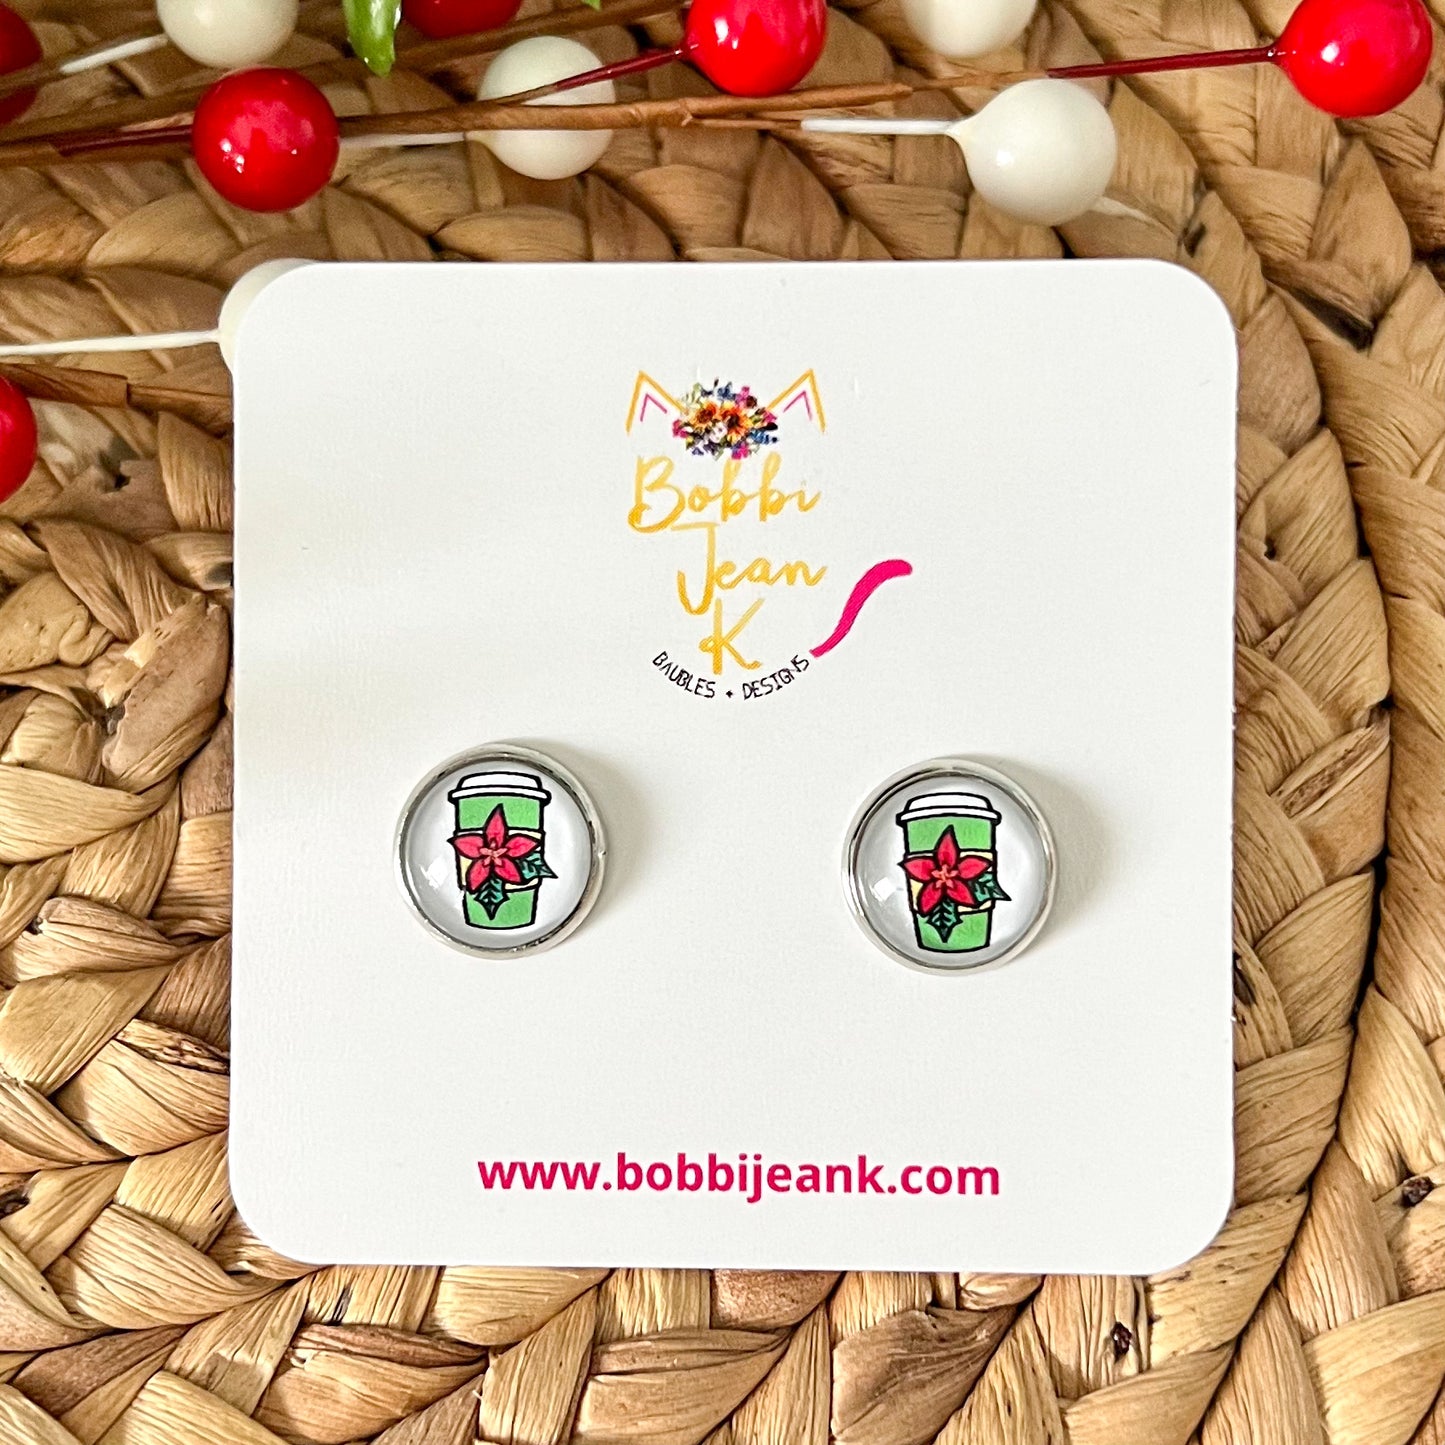 Poinsettia Coffee Cup Glass Studs 12mm: OPEN ITEM TO CHOOSE SILVER OR GOLD SETTINGS - LAST CHANCE